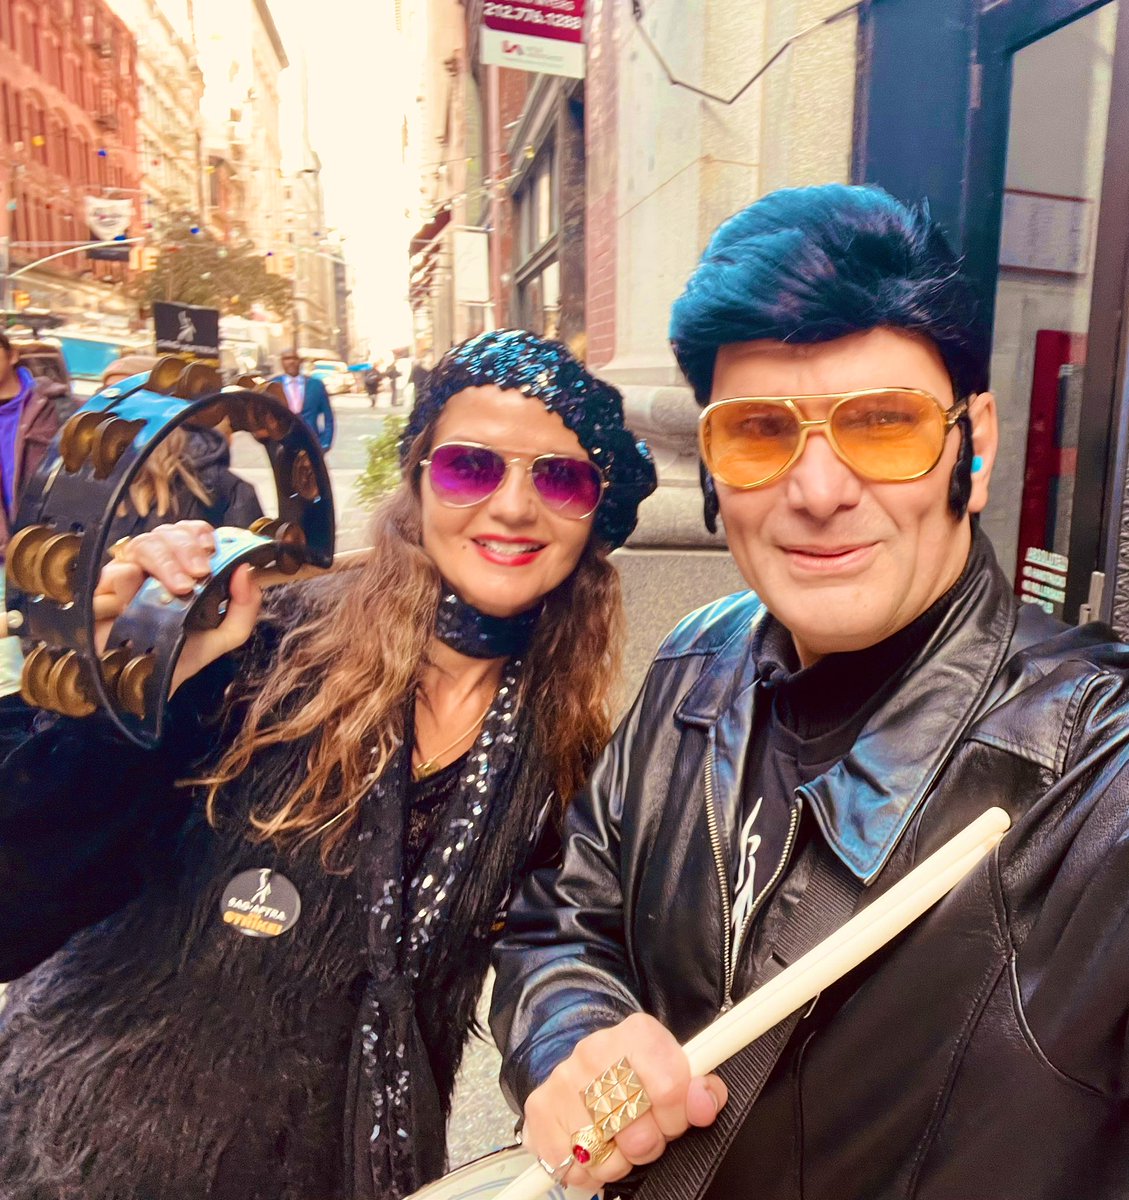 In the spirit of Halloween & our mega outing in solidarity, - singer/actress @JillHennessy as Stevie Nicks & yours truly as Elvis….✨🎬 #SagaftraChallenge @pagesix @SagAftra #SagAftra @nypost @DEADLINE @THR @snydenydn #Equity #AFM @ViralNewsNYC @nytimes #ActorsWorld #TheaterNYC